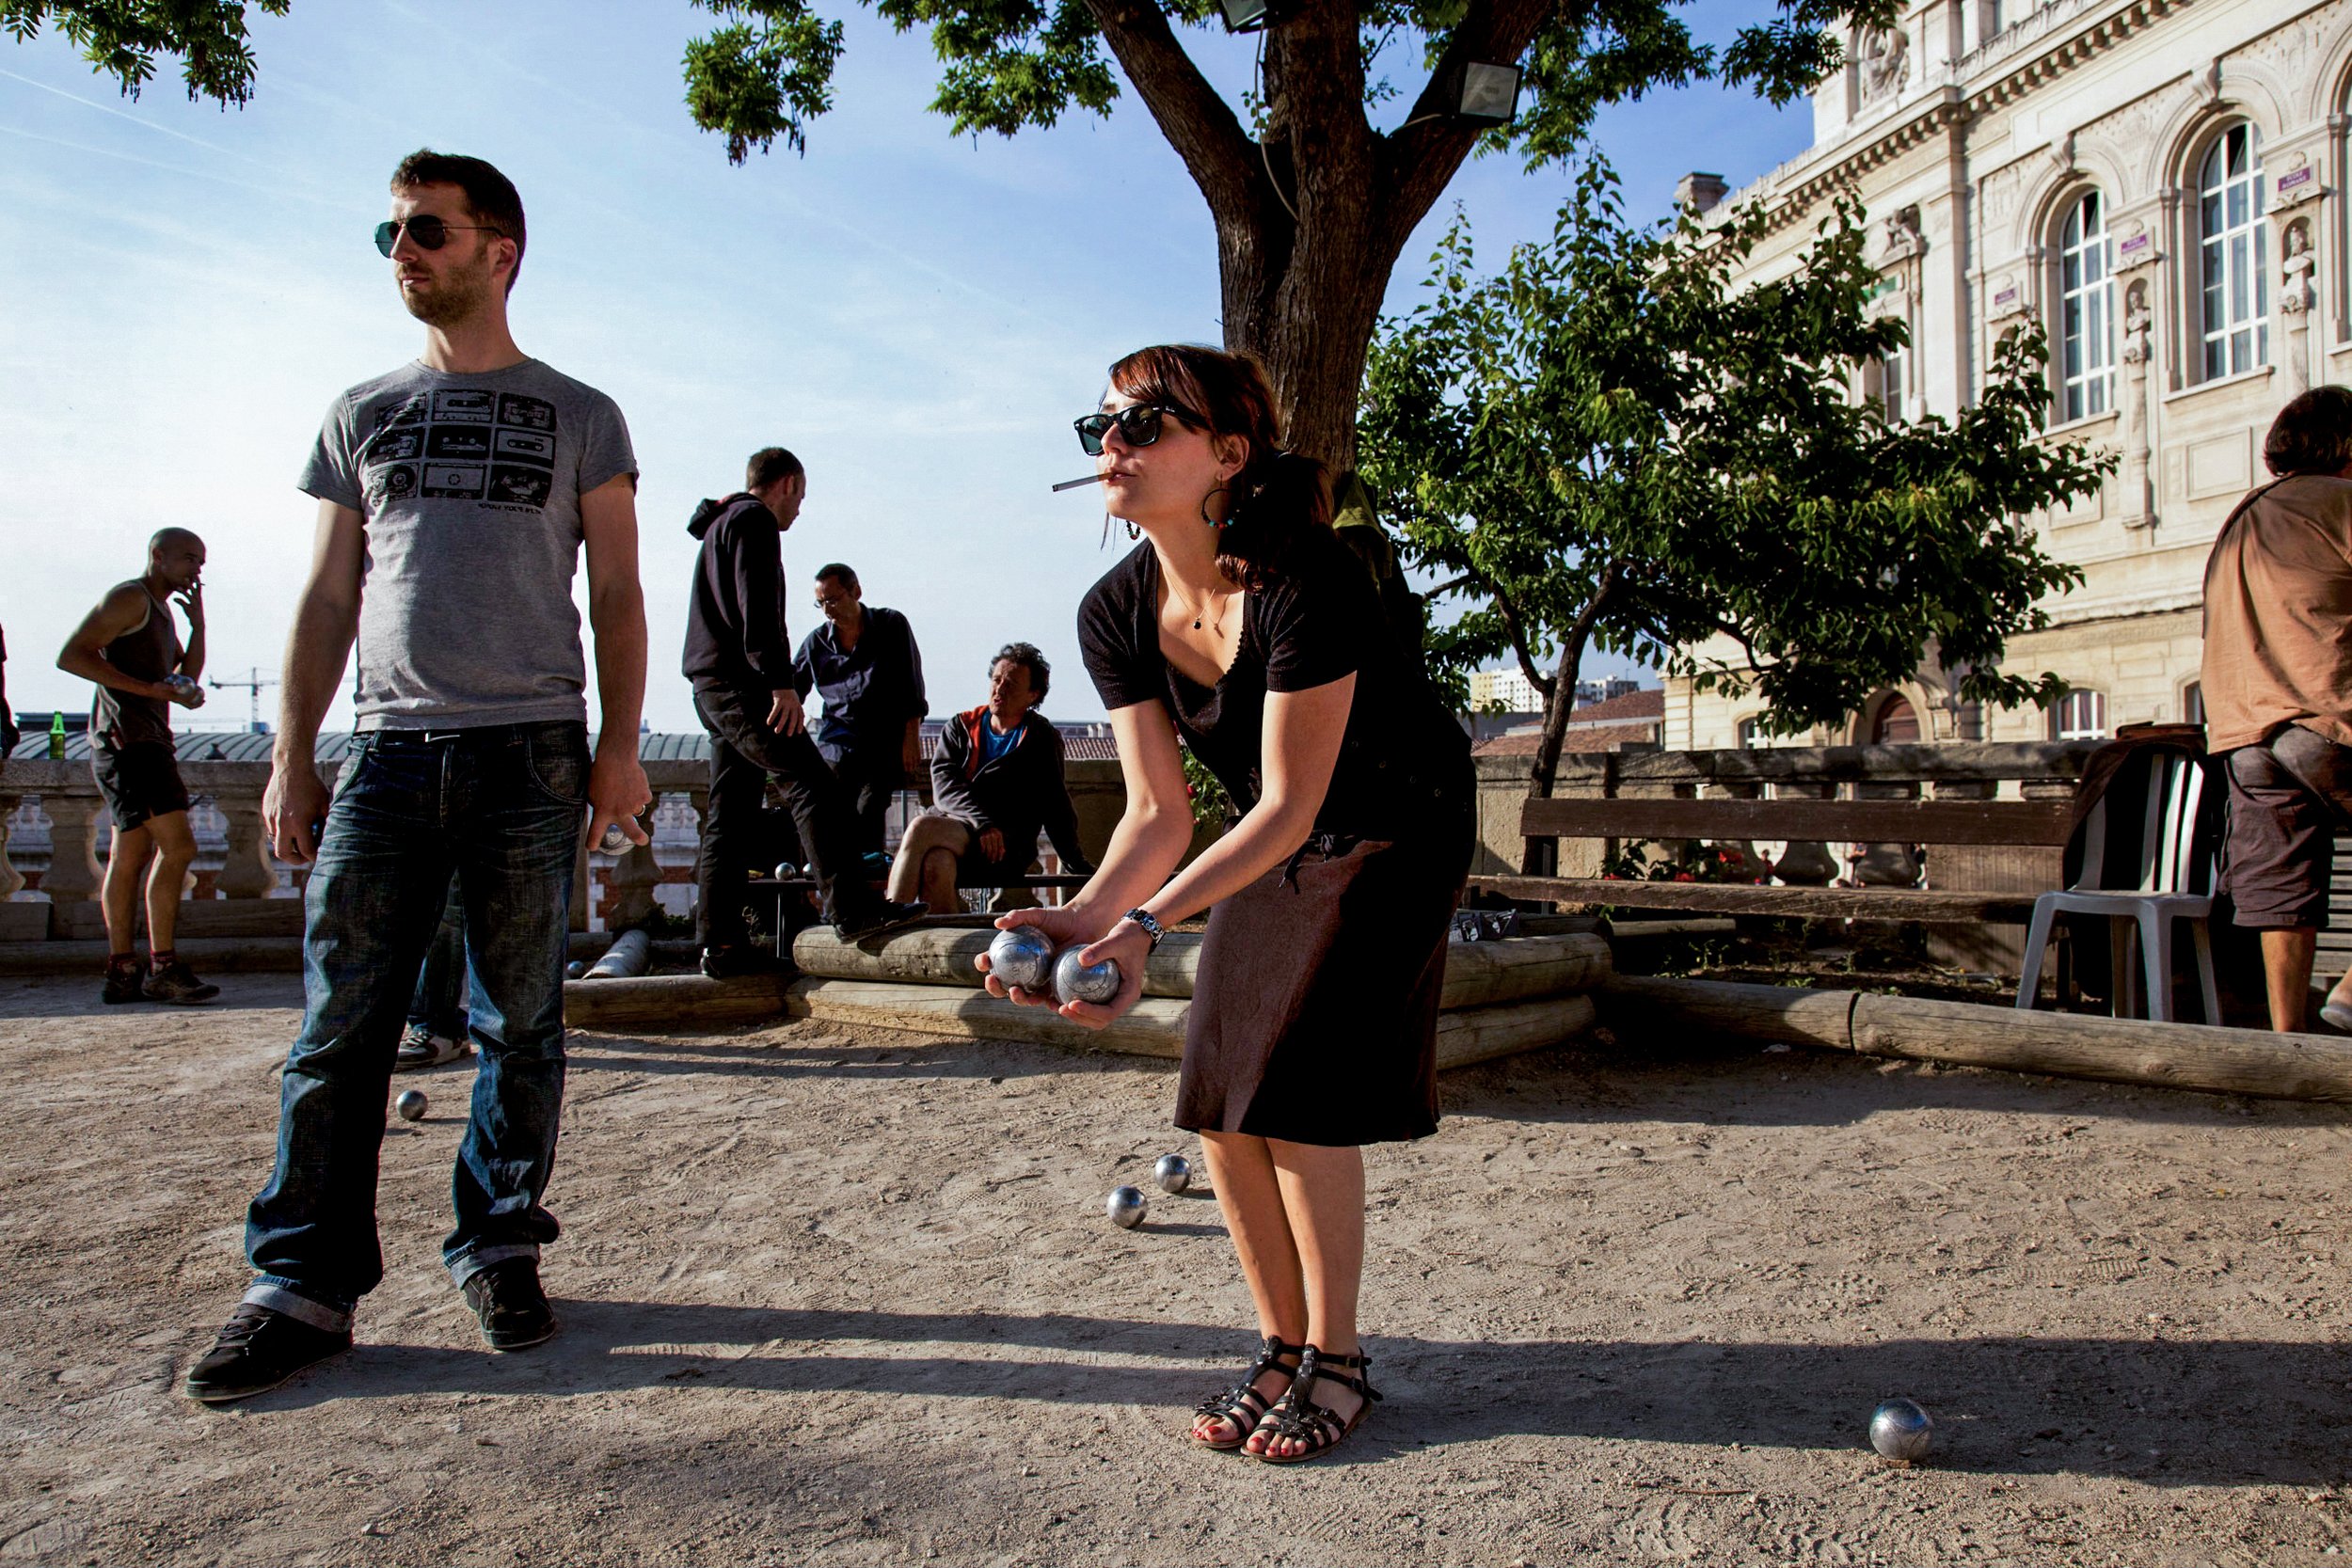  Marseillians play the classic local game of pétanque at the Boulodrome Les 3 Mages in Marseille, France on May 10, 2011. 